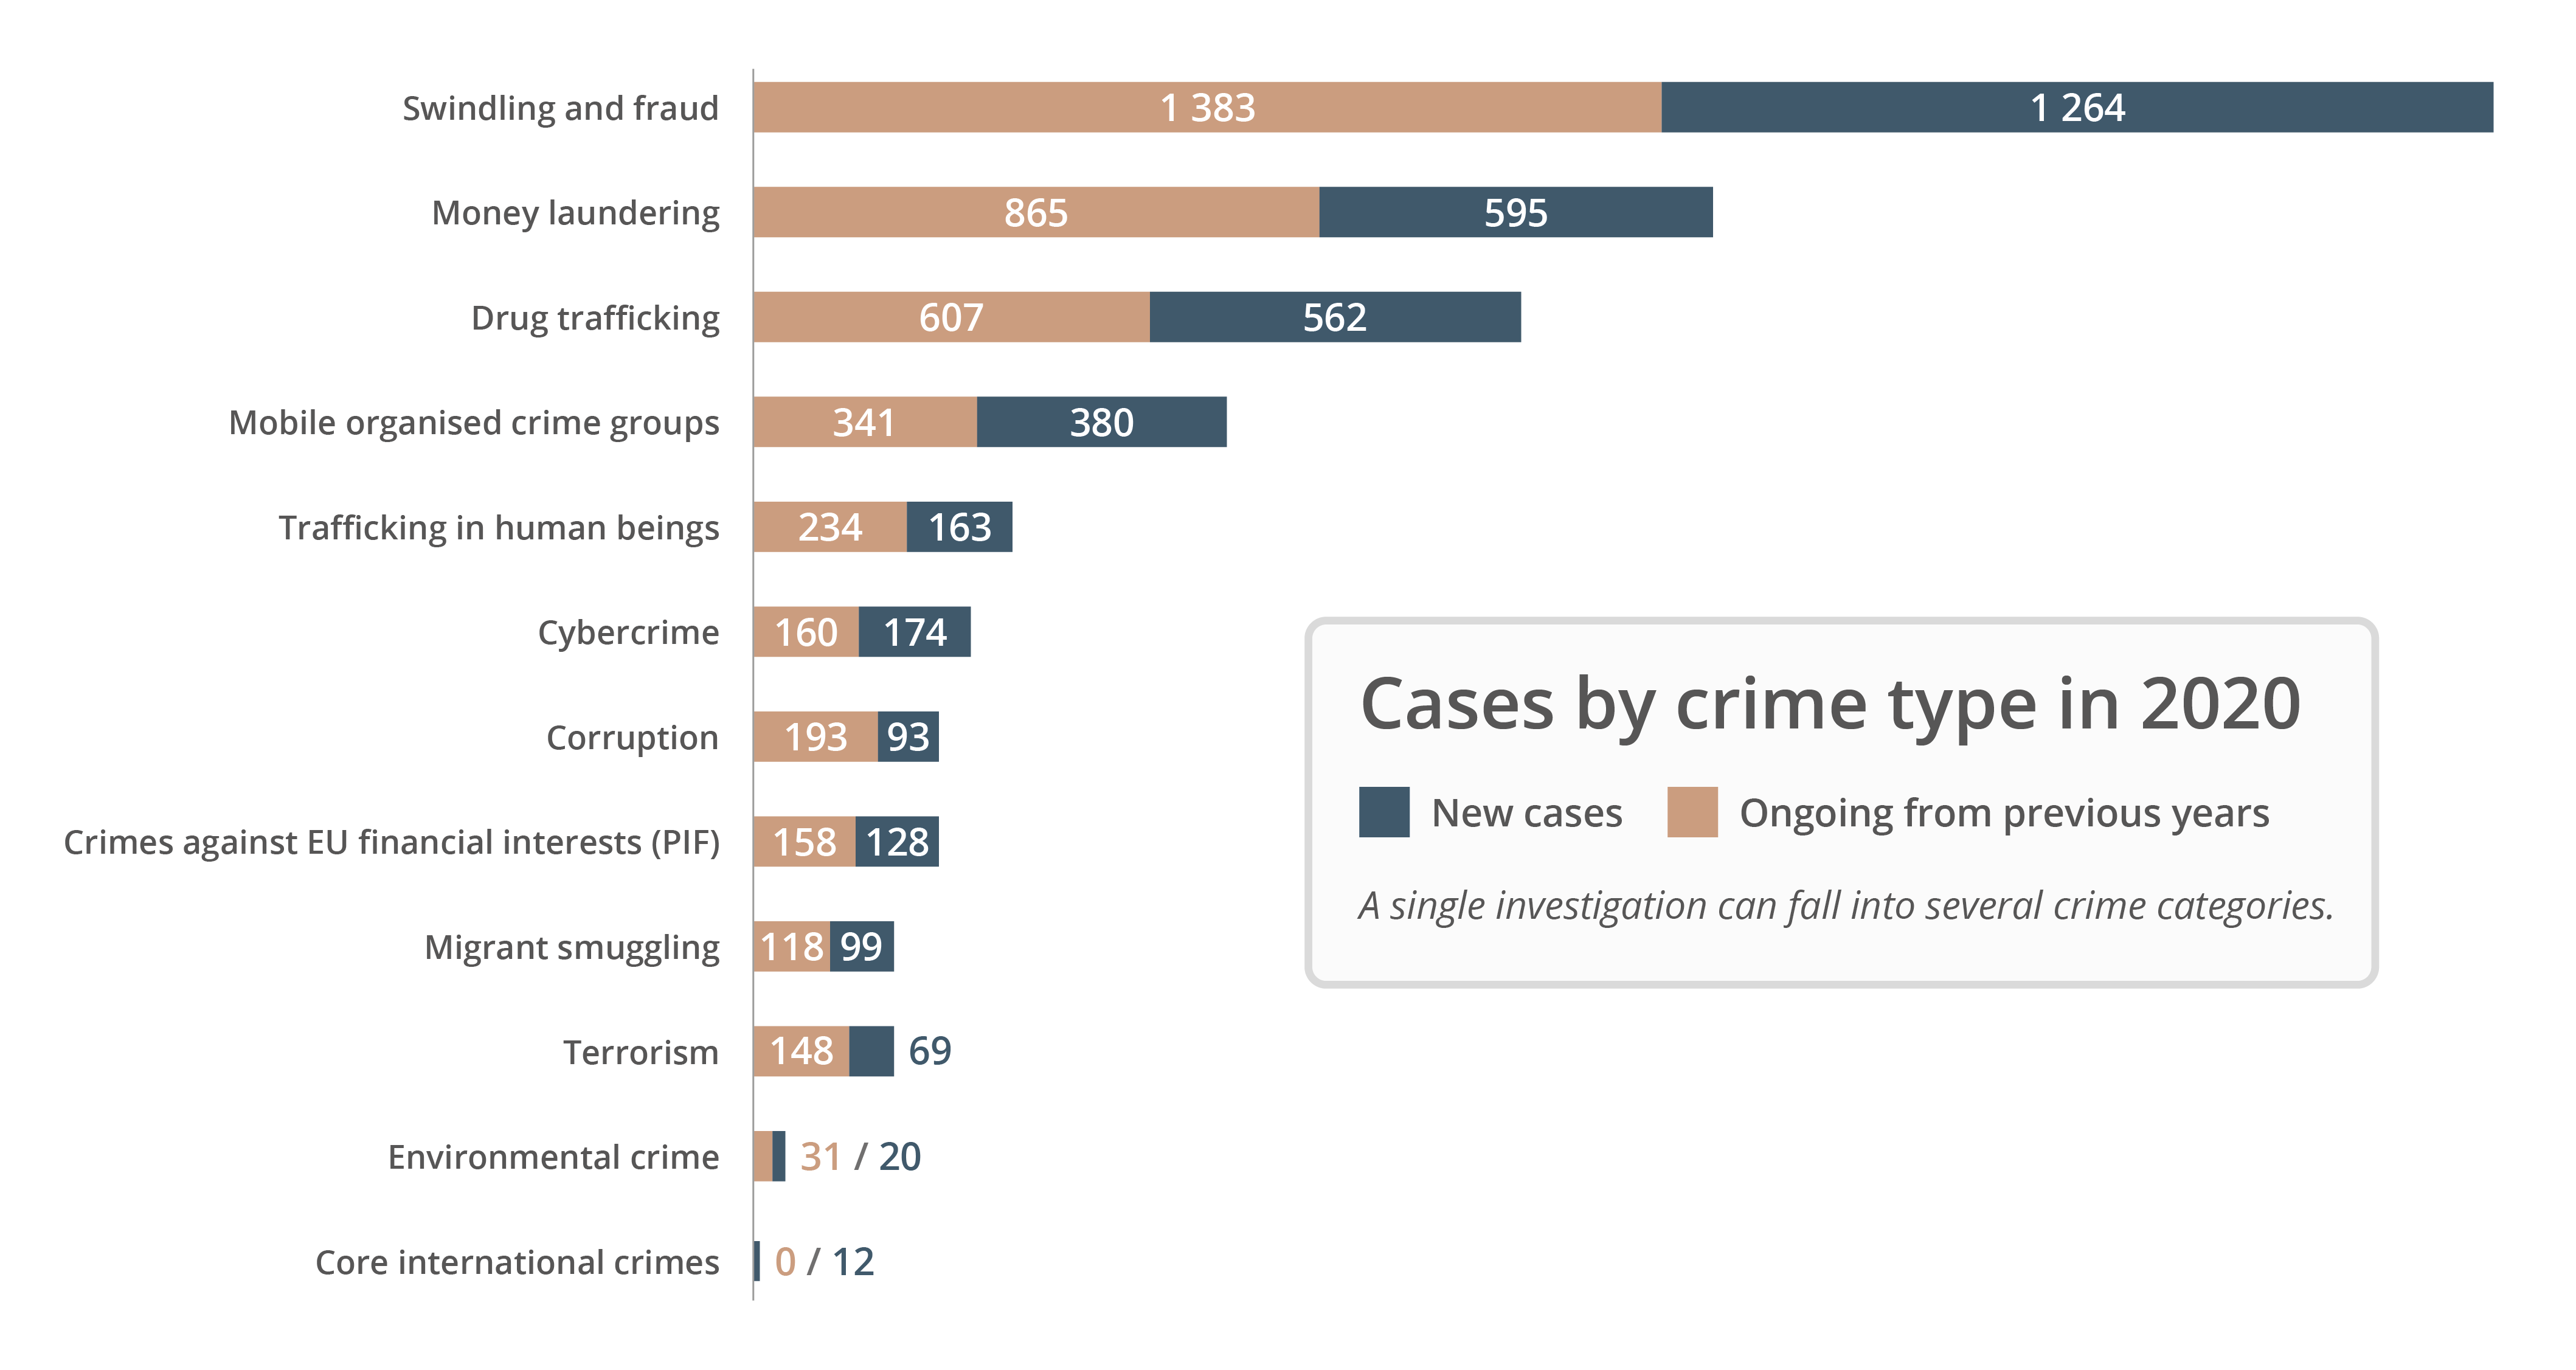 Chart showing cases by crime type in 2020, both new and ongoing